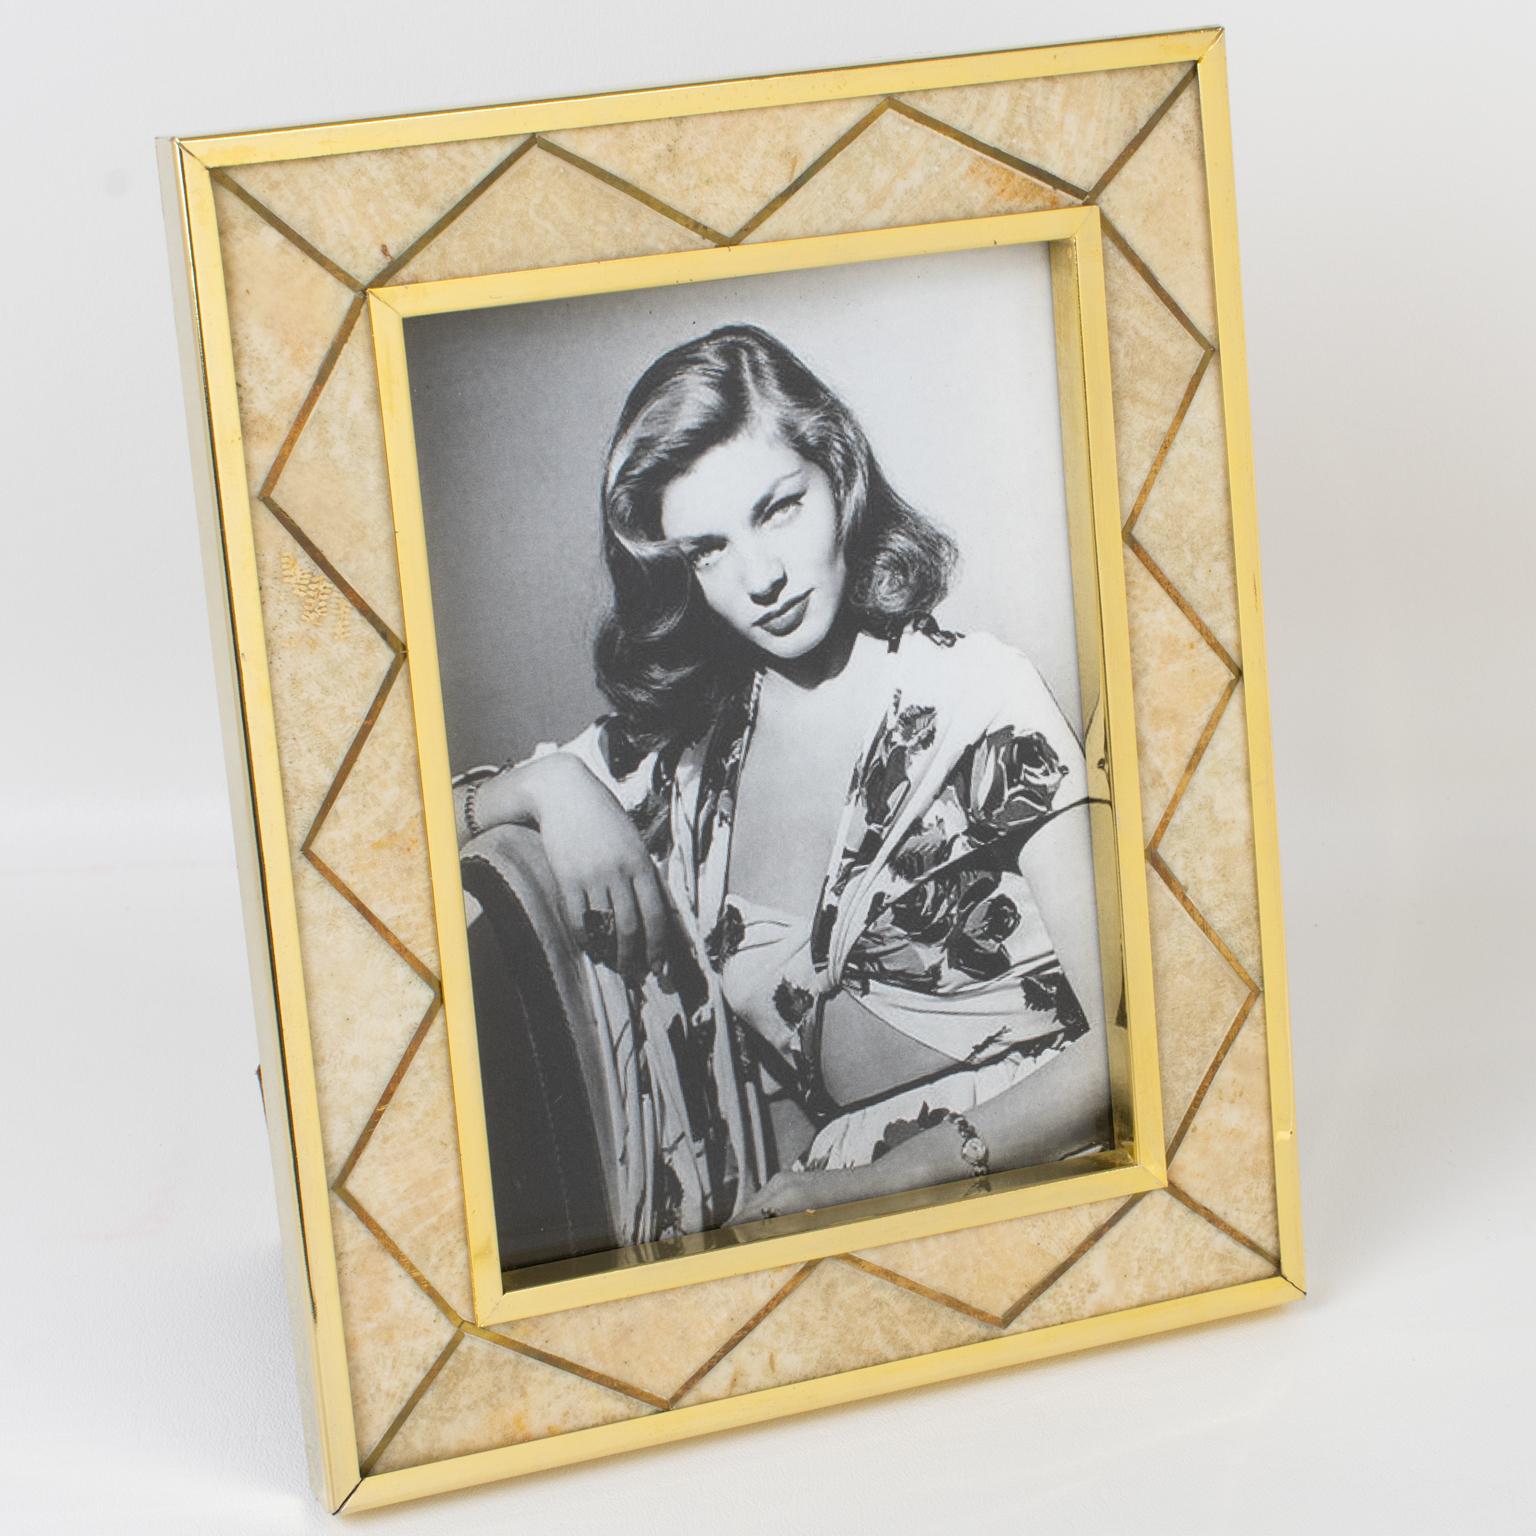 A charming gilded brass and stone picture photo frame designed by Italian designer Rita Frascione, Firenze, in the 1980s. 
The piece features gilded metal framing with marquetry made of brass inlaid and travertine stone in warm beige and gold